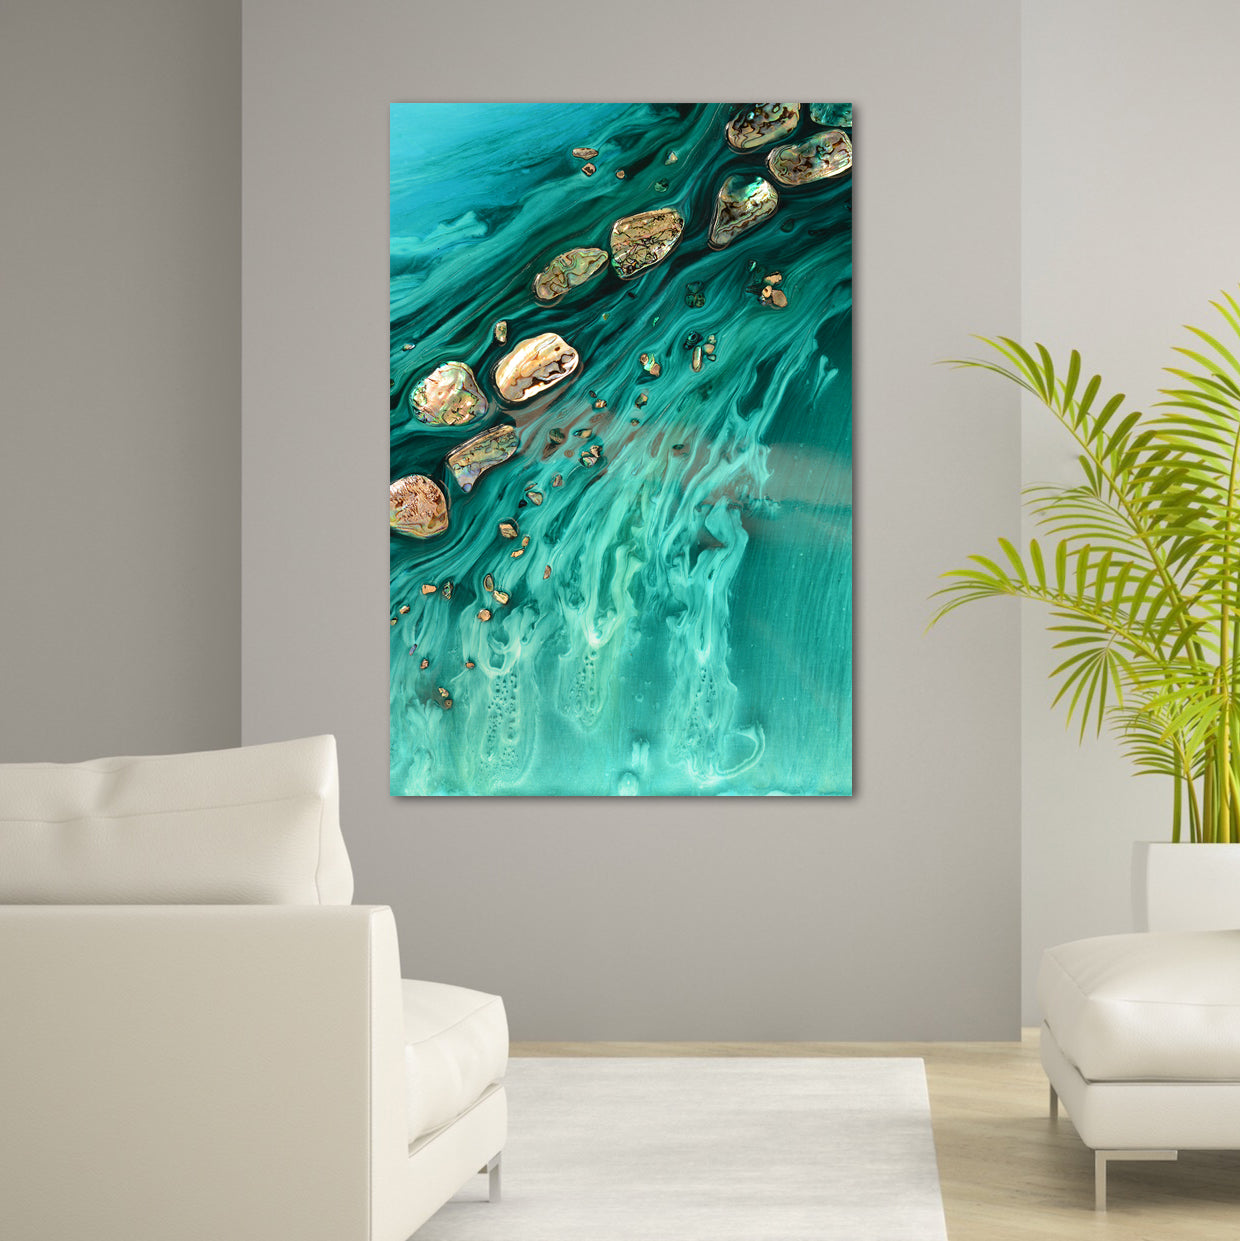 Abstract Ocean Artwork. Rise Above Seashells 1. Art Print. Antuanelle 2 Limited Edition Print